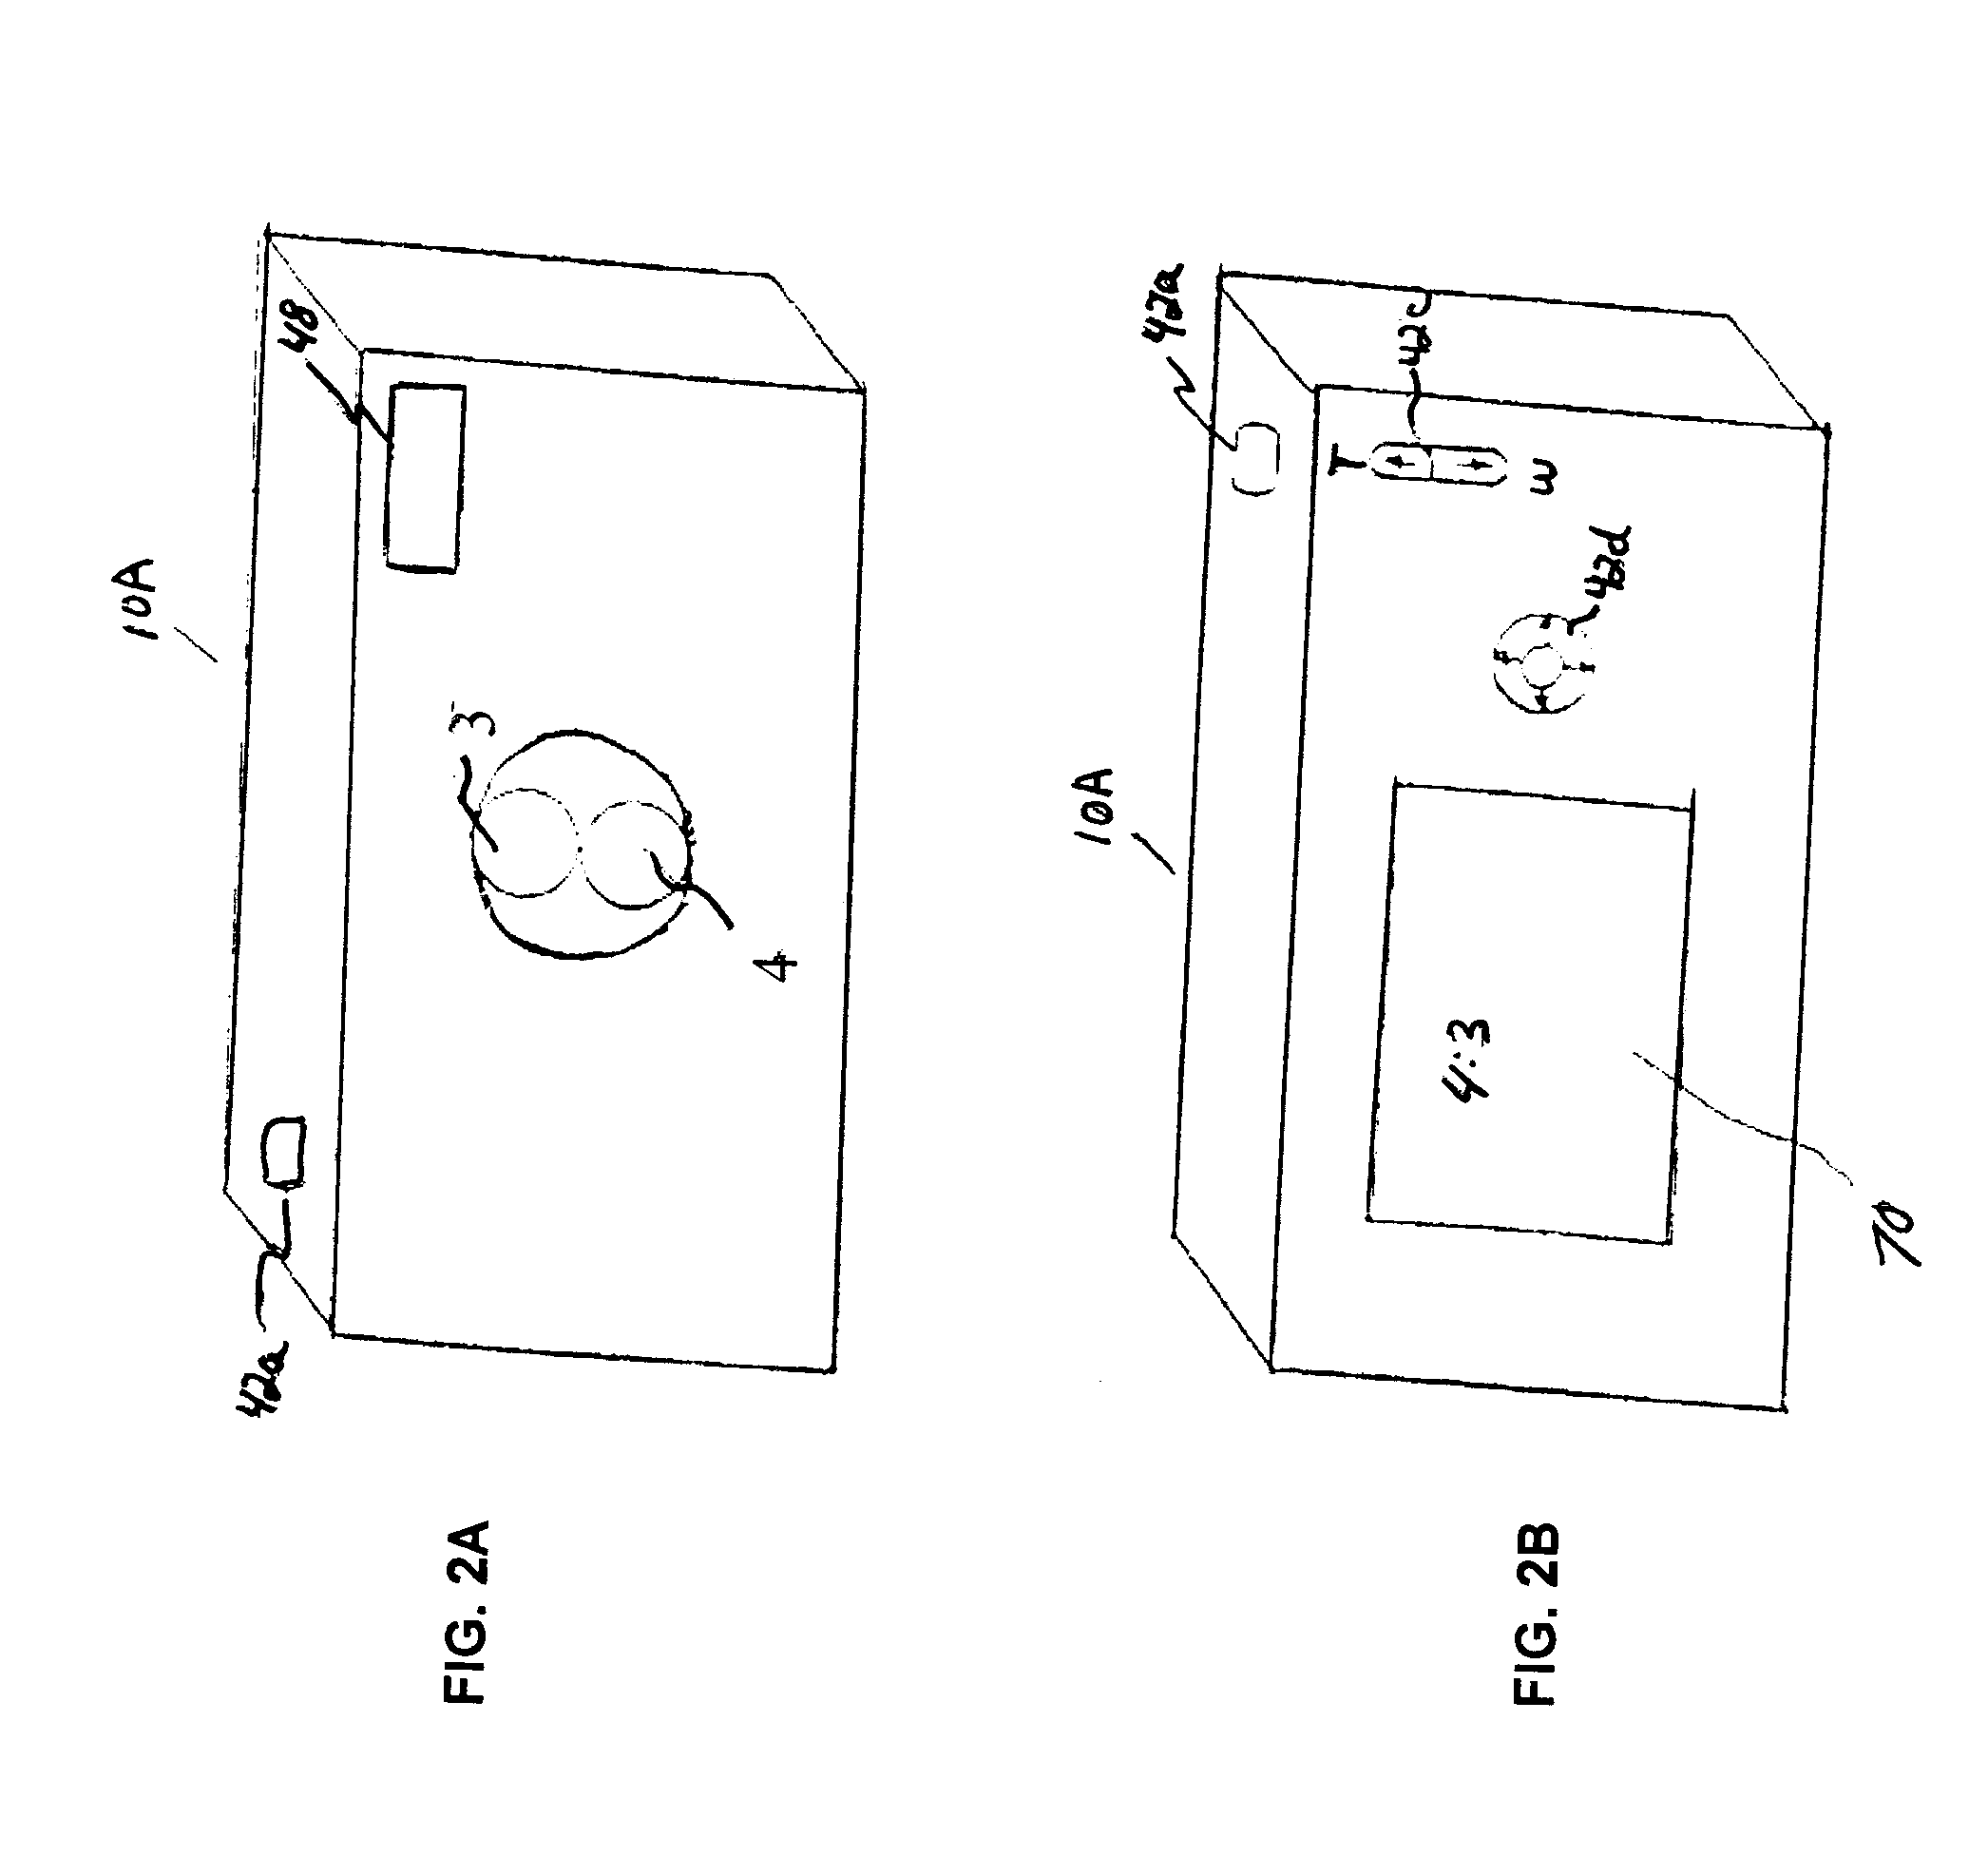 Camera using multiple lenses and image sensors to provide improved focusing capability